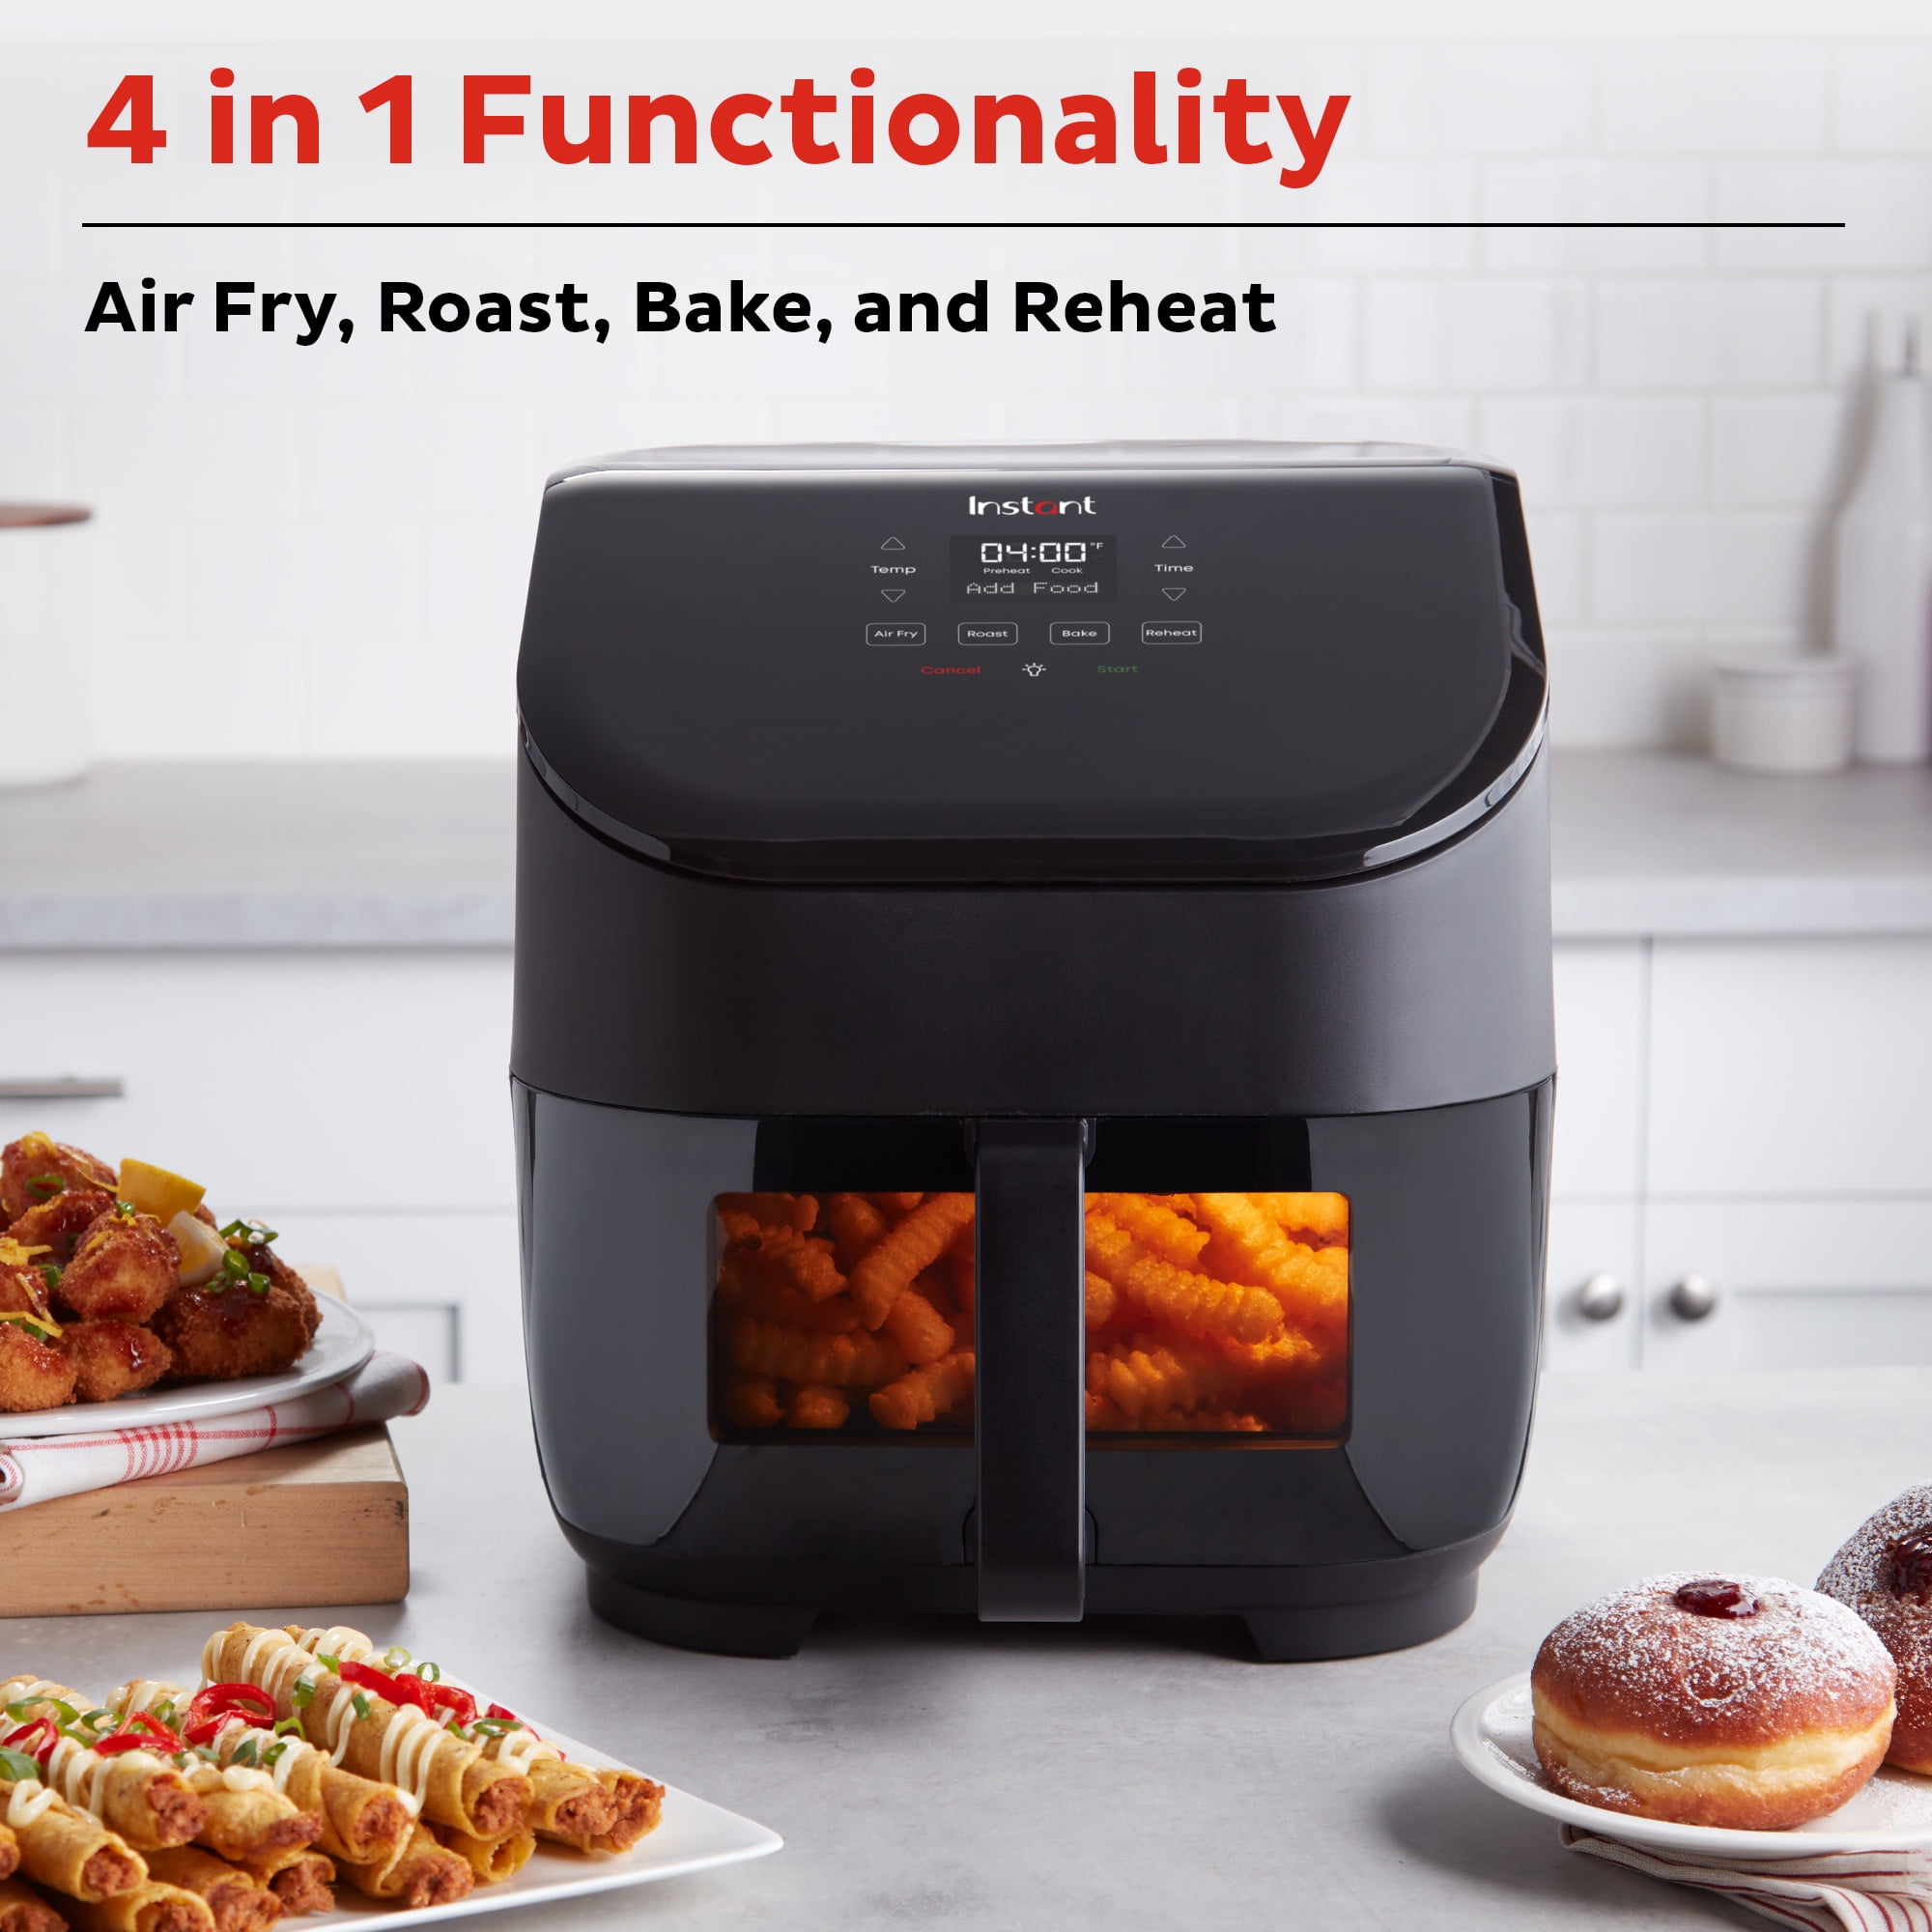  Instant Pot 5.7-QT Air Fryer Oven with Accessories, From the  Makers of Instant Pot, Customizable Smart Cooking Programs, Digital  Touchscreen, Dishwasher-Safe Basket, App with over 100 Recipes : Home &  Kitchen